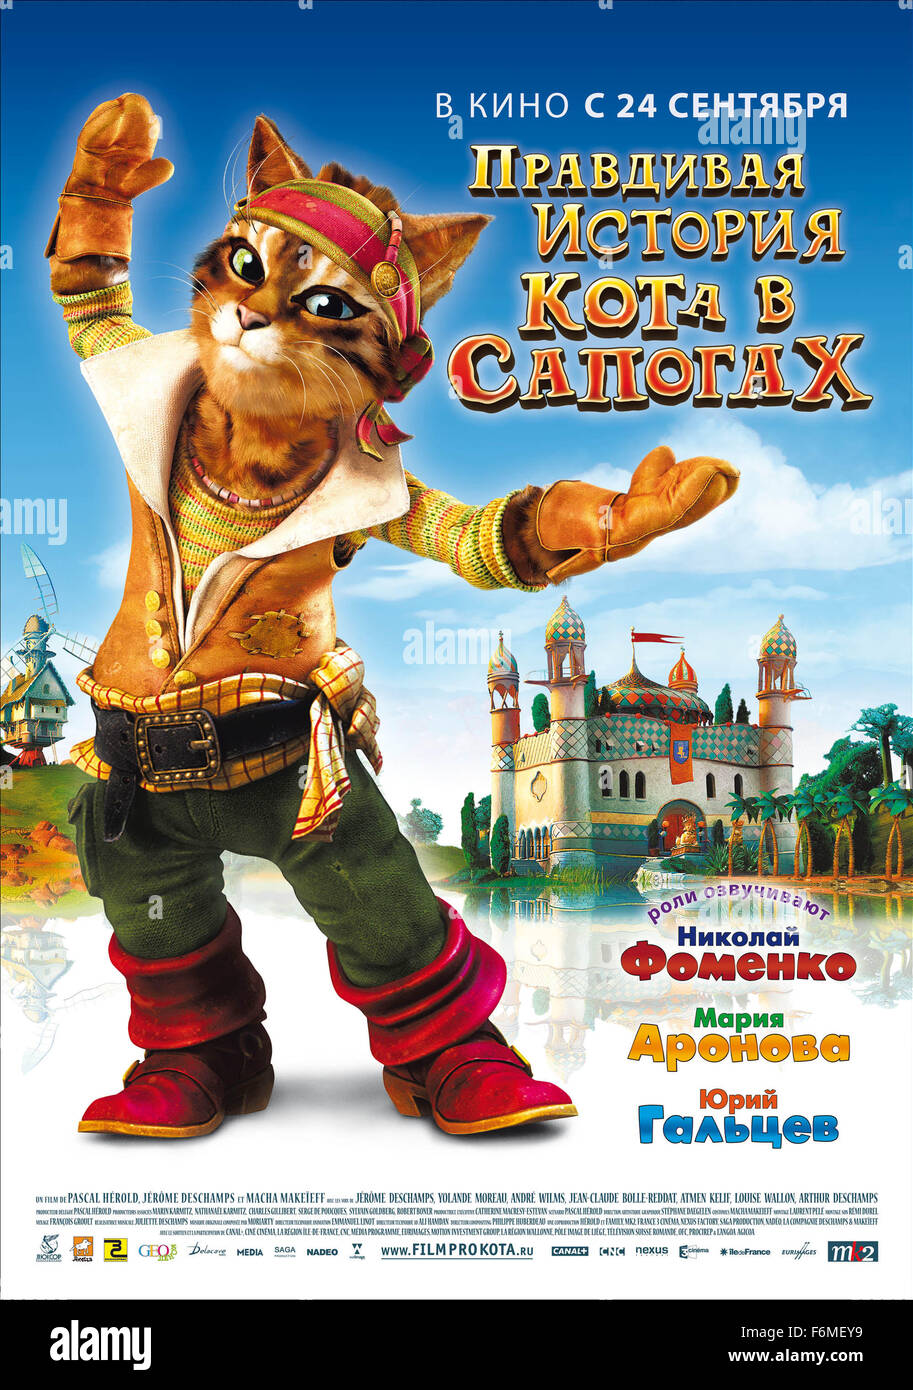 RELEASE DATE: 2009. MOVIE TITLE: The True Story of Puss'N Boot. STUDIO:  Herold and Family. PLOT: A free adaptation of Charles Perrault's famous Puss'n  Boots,The True Story of Puss'n Boots is a